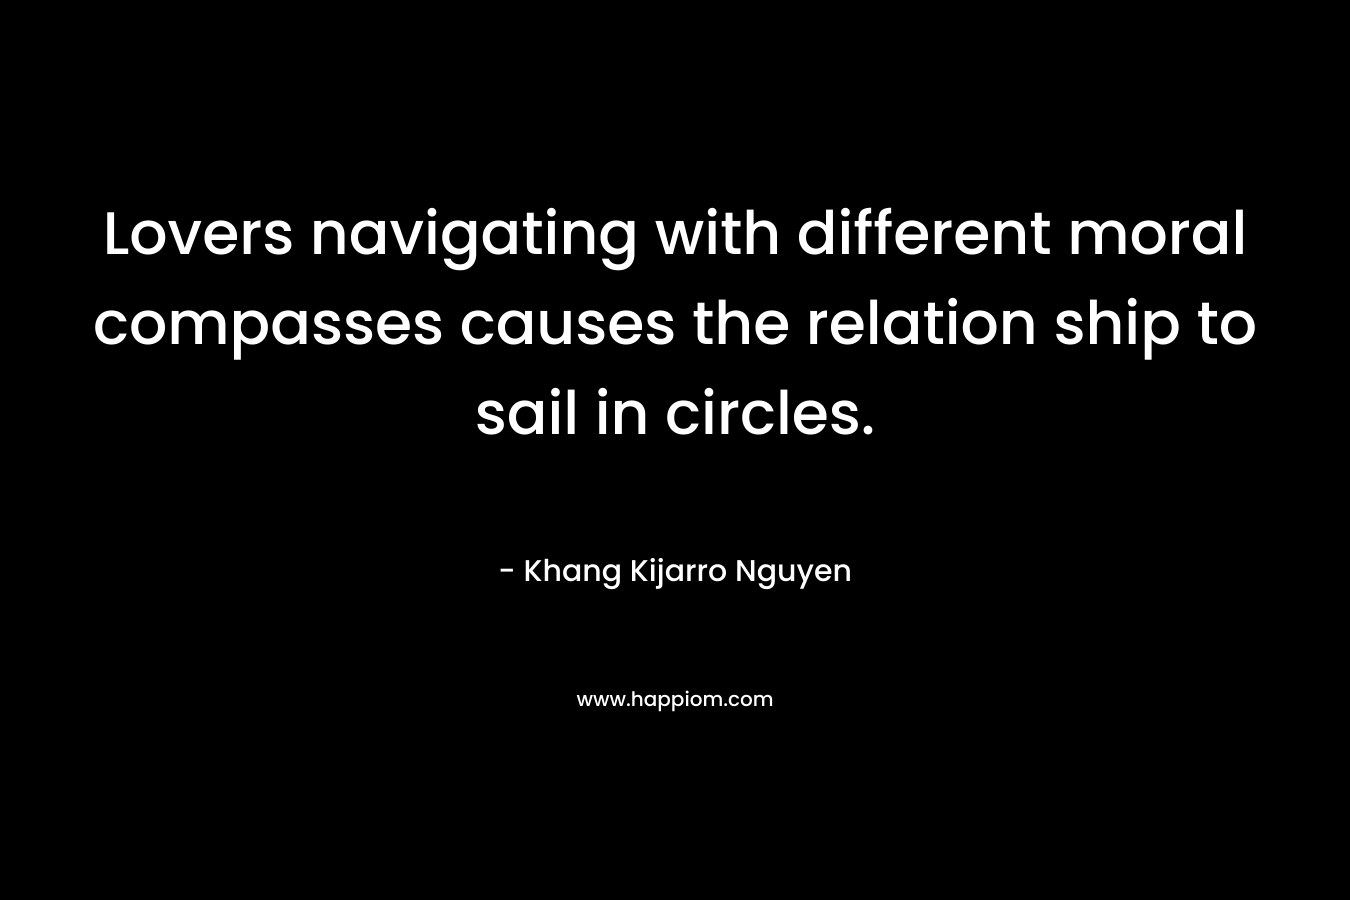 Lovers navigating with different moral compasses causes the relation ship to sail in circles.